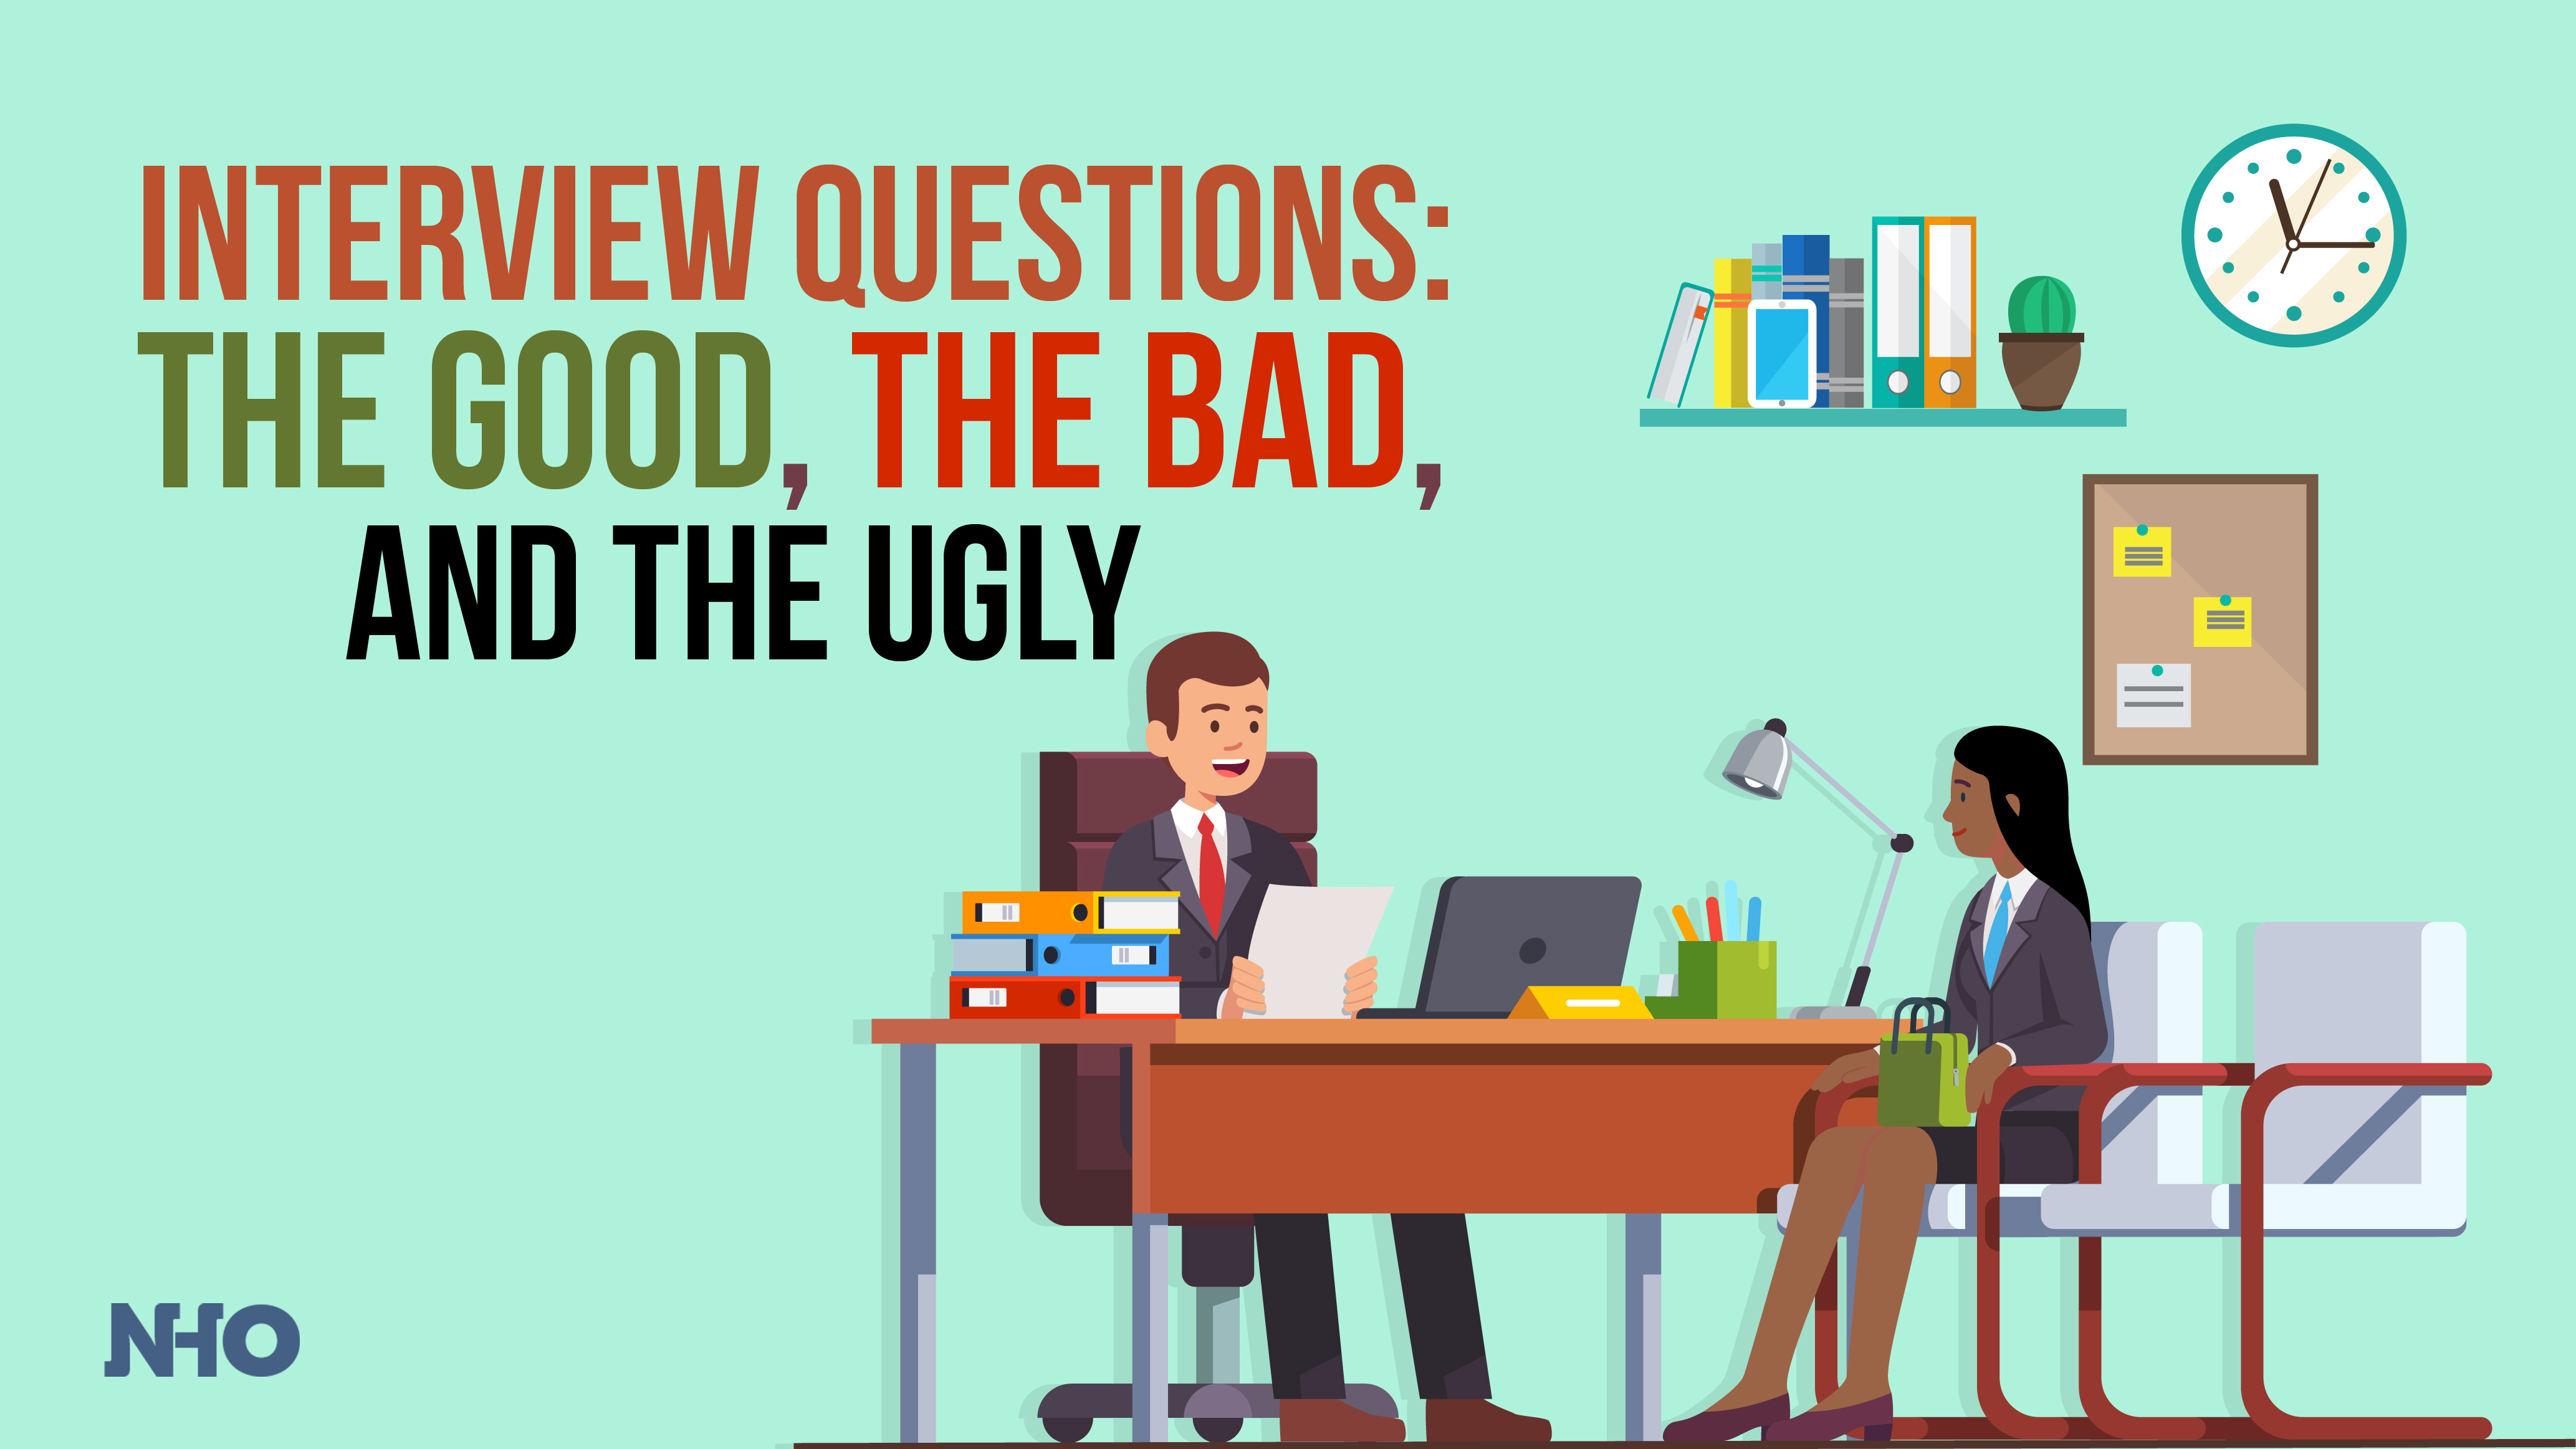 Interview Questions: The Good, the Bad, and the Ugly